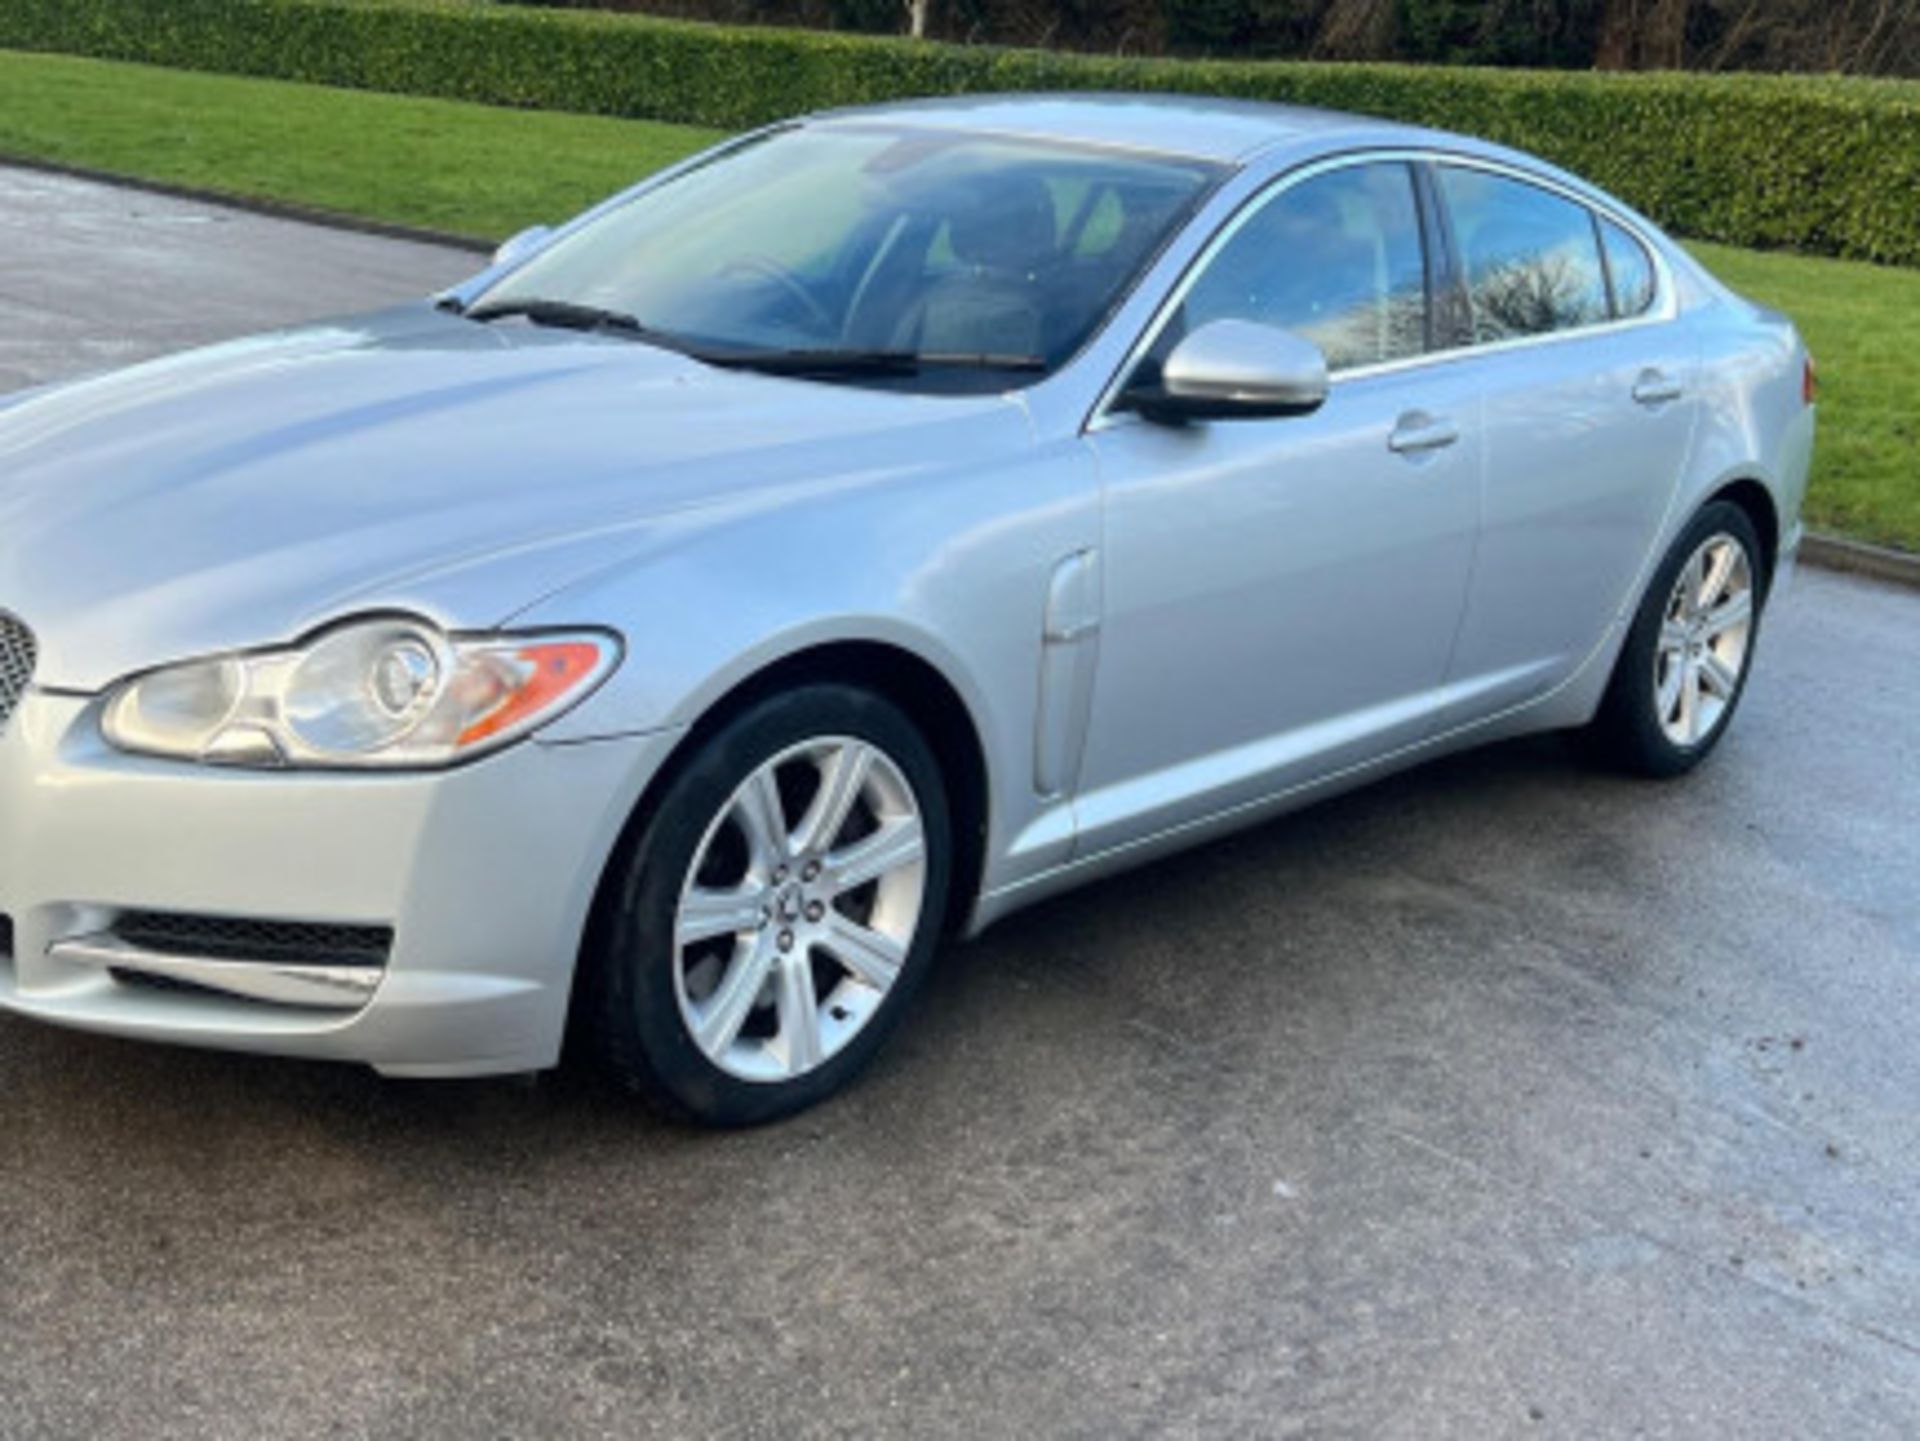 LUXURIOUS JAGUAR XF 3.0D V6 LUXURY 4DR AUTOMATIC SALOON >>--NO VAT ON HAMMER--<< - Image 32 of 80